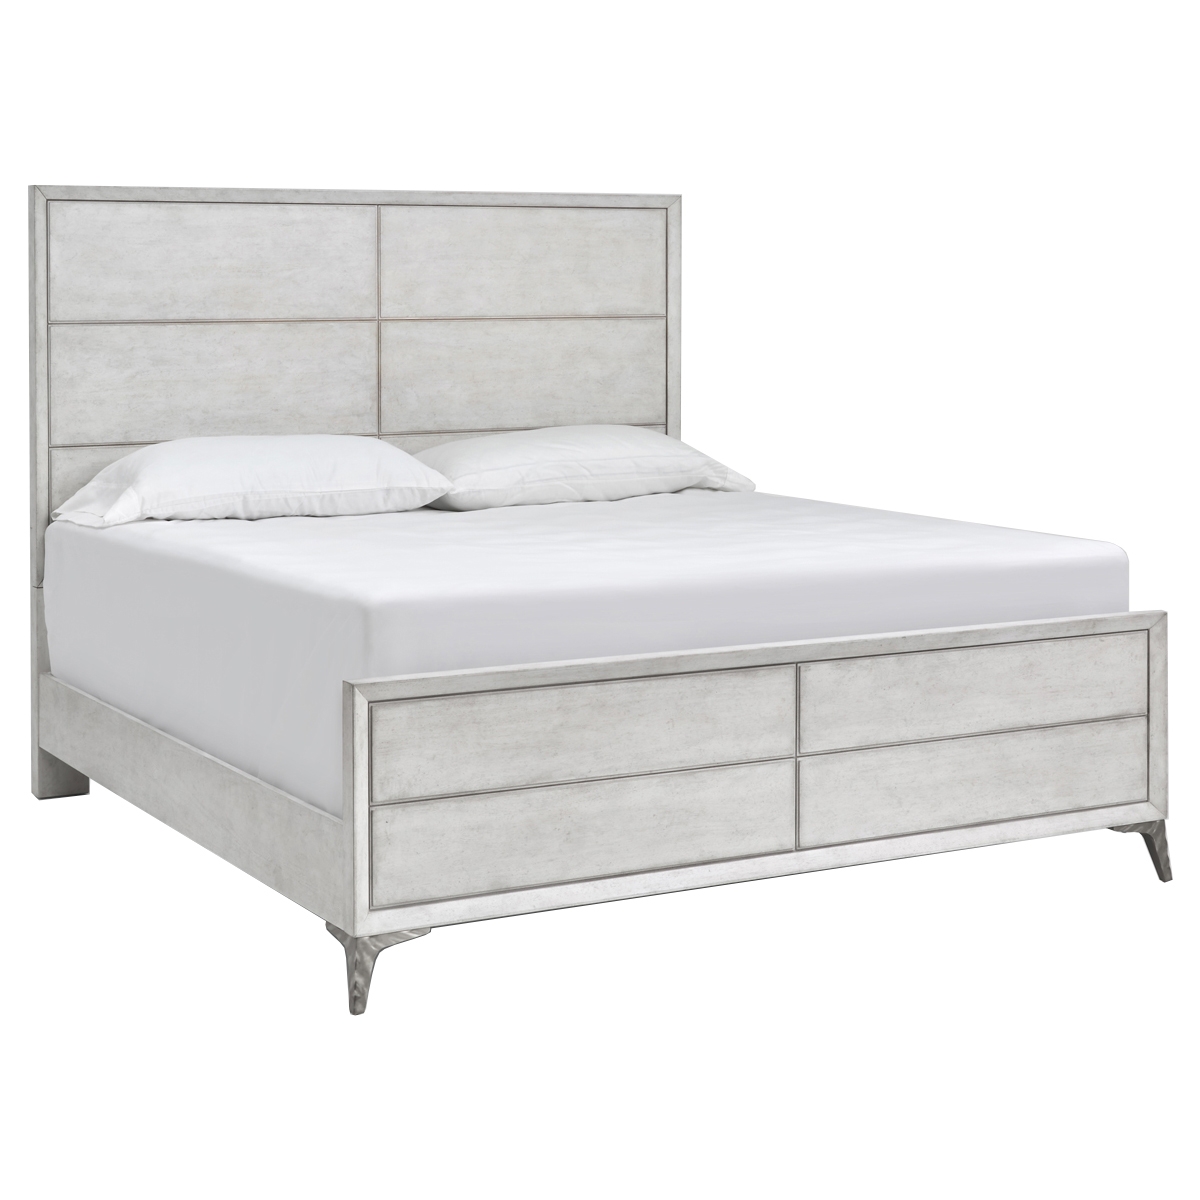 Picture of TRANQUILO KING PANEL BED